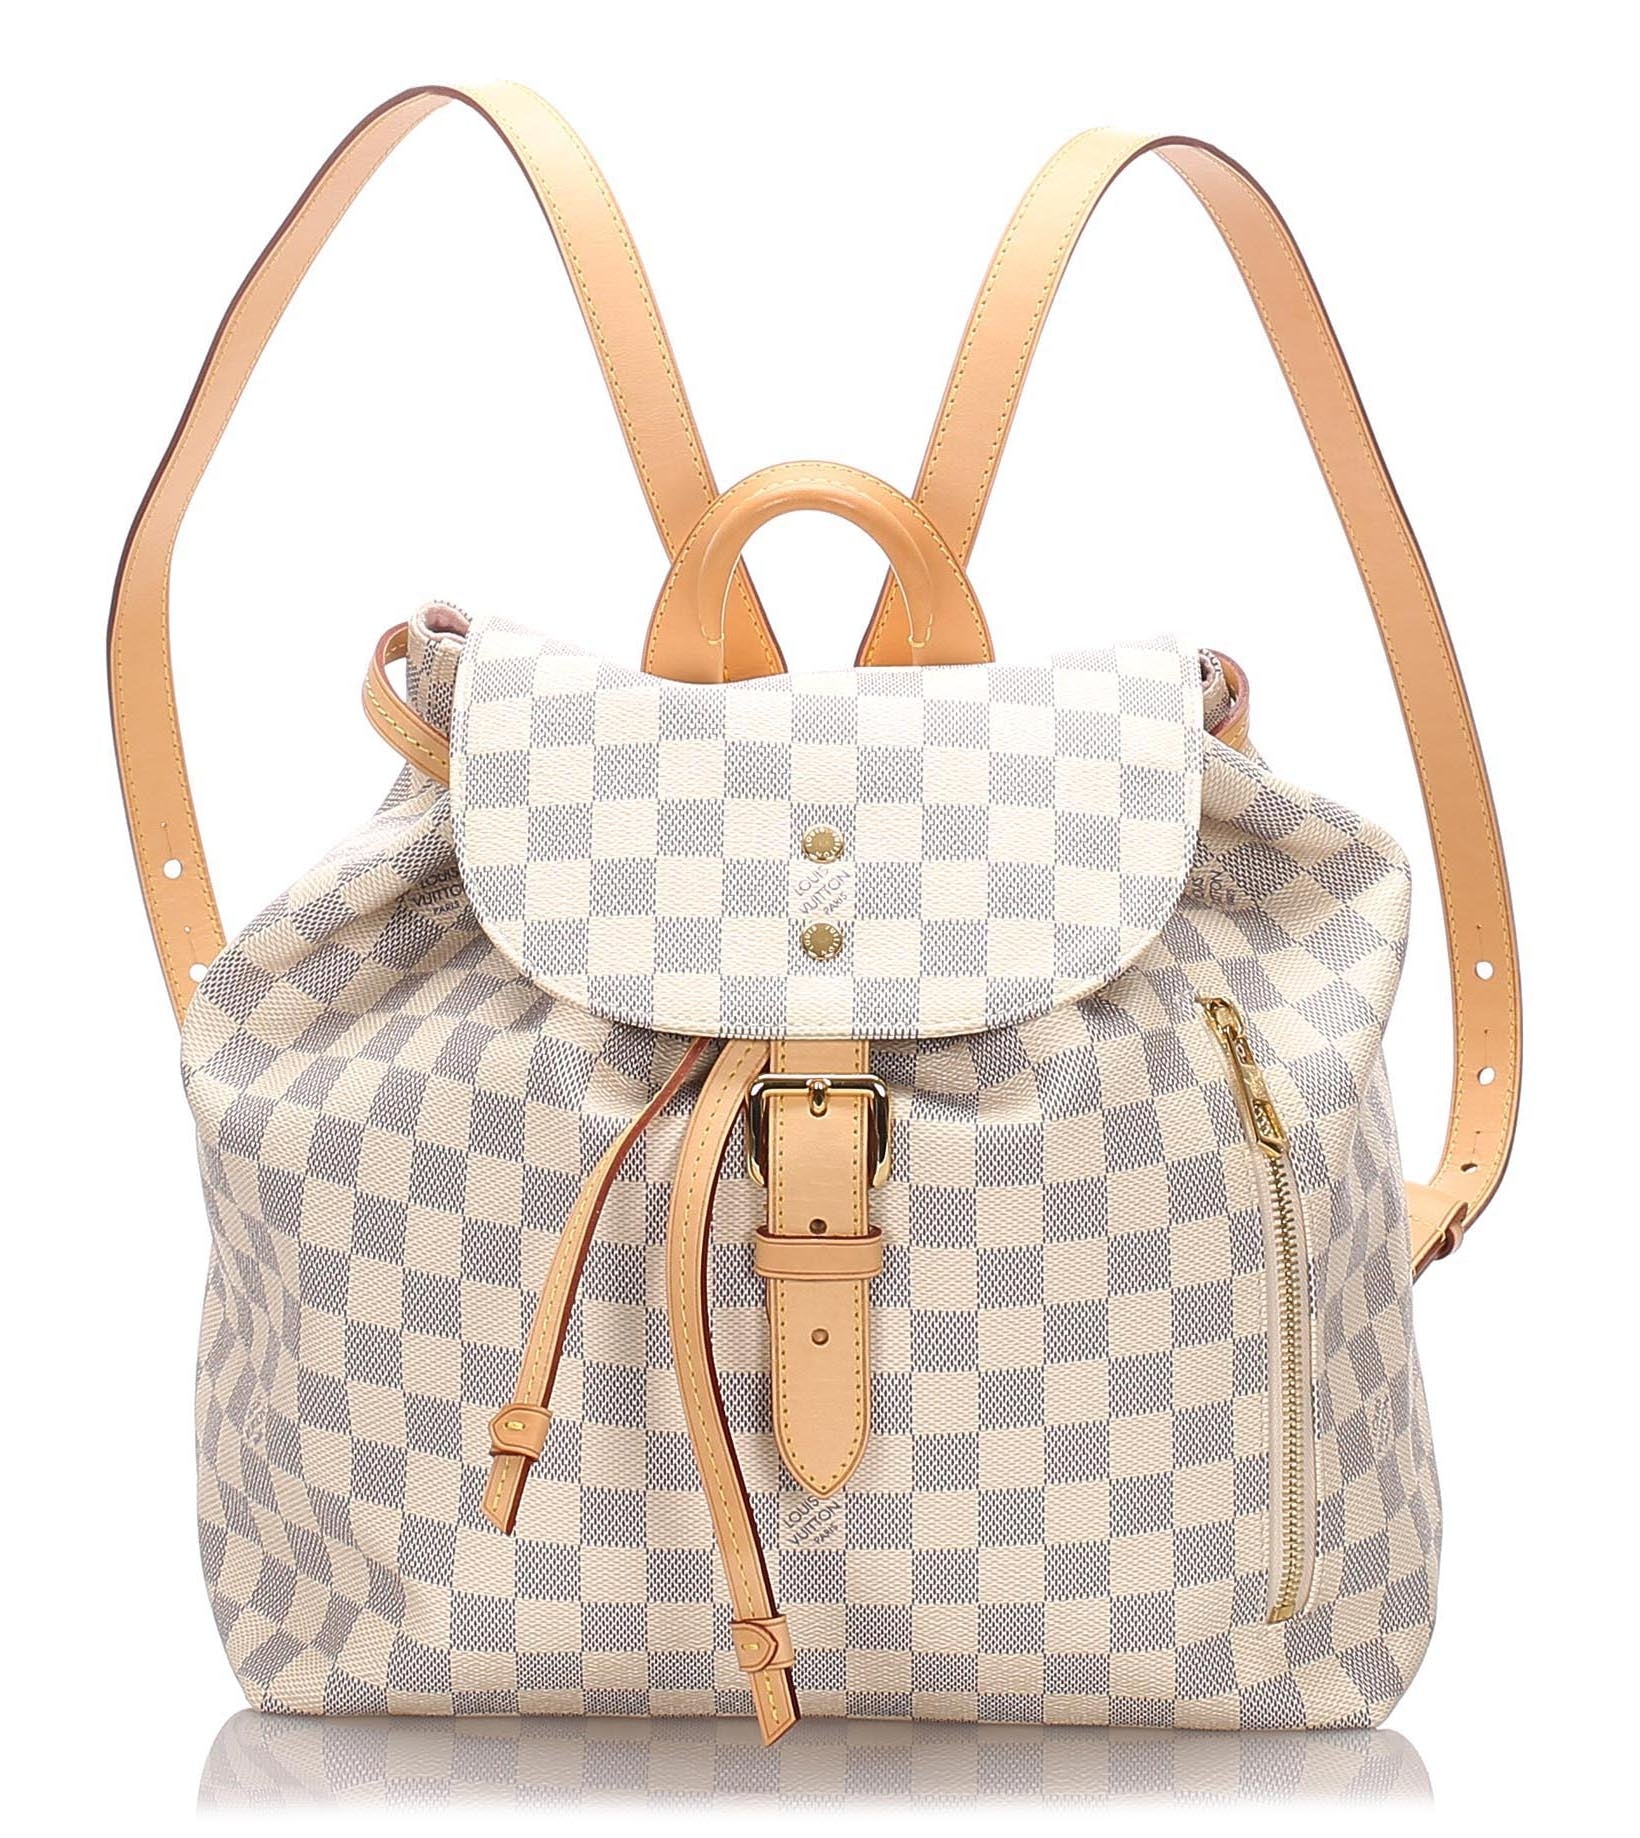 The Louis Vuitton Sperone Backpack - A Perfect Blend of Luxury and Functionality